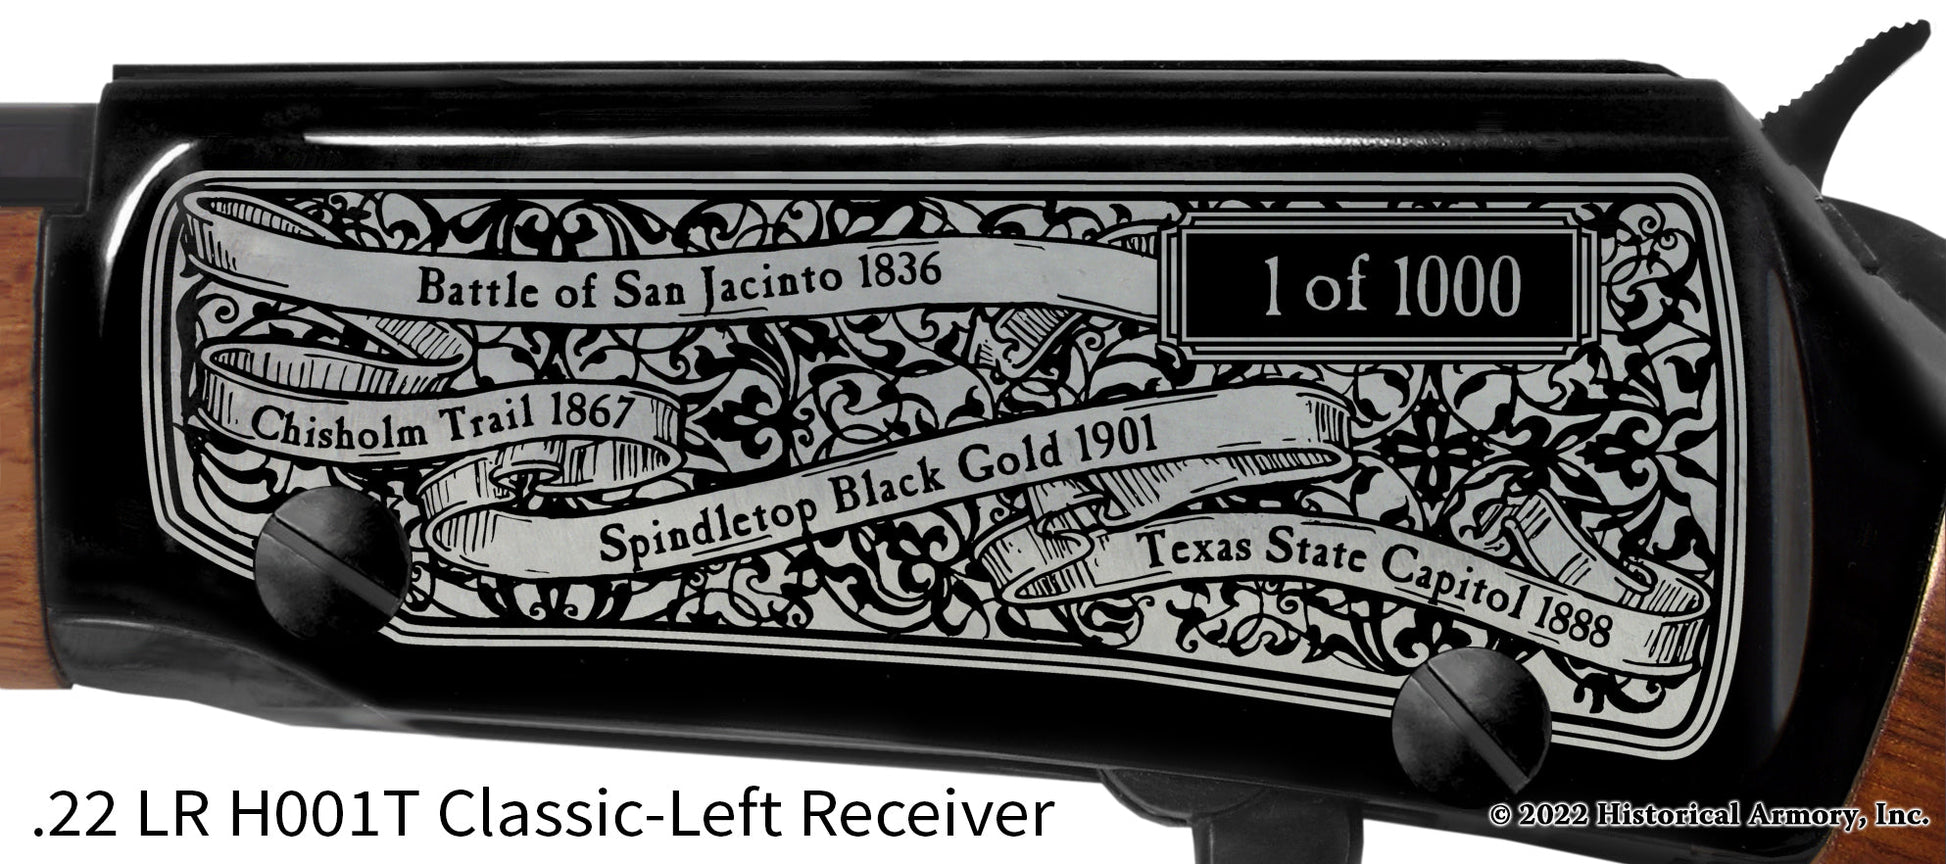 Texas State Pride Engraved H00T Receiver detail Henry Rifle